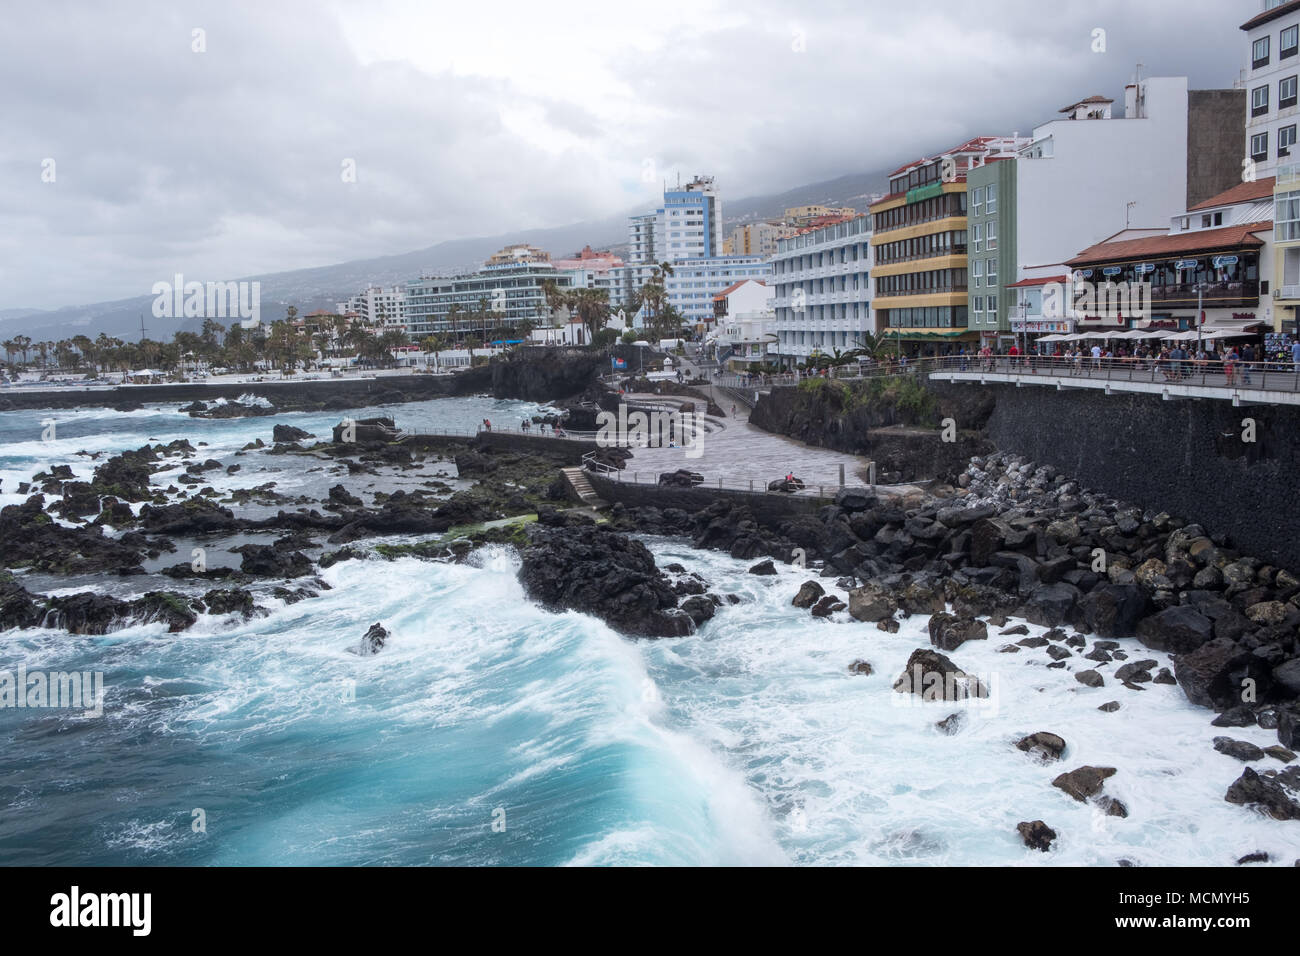 Puerto de la Cruz, Tenerife, Canary Islands;  rough seas on the well-maintained seafront as the wind picks up from an approaching storm. Stock Photo